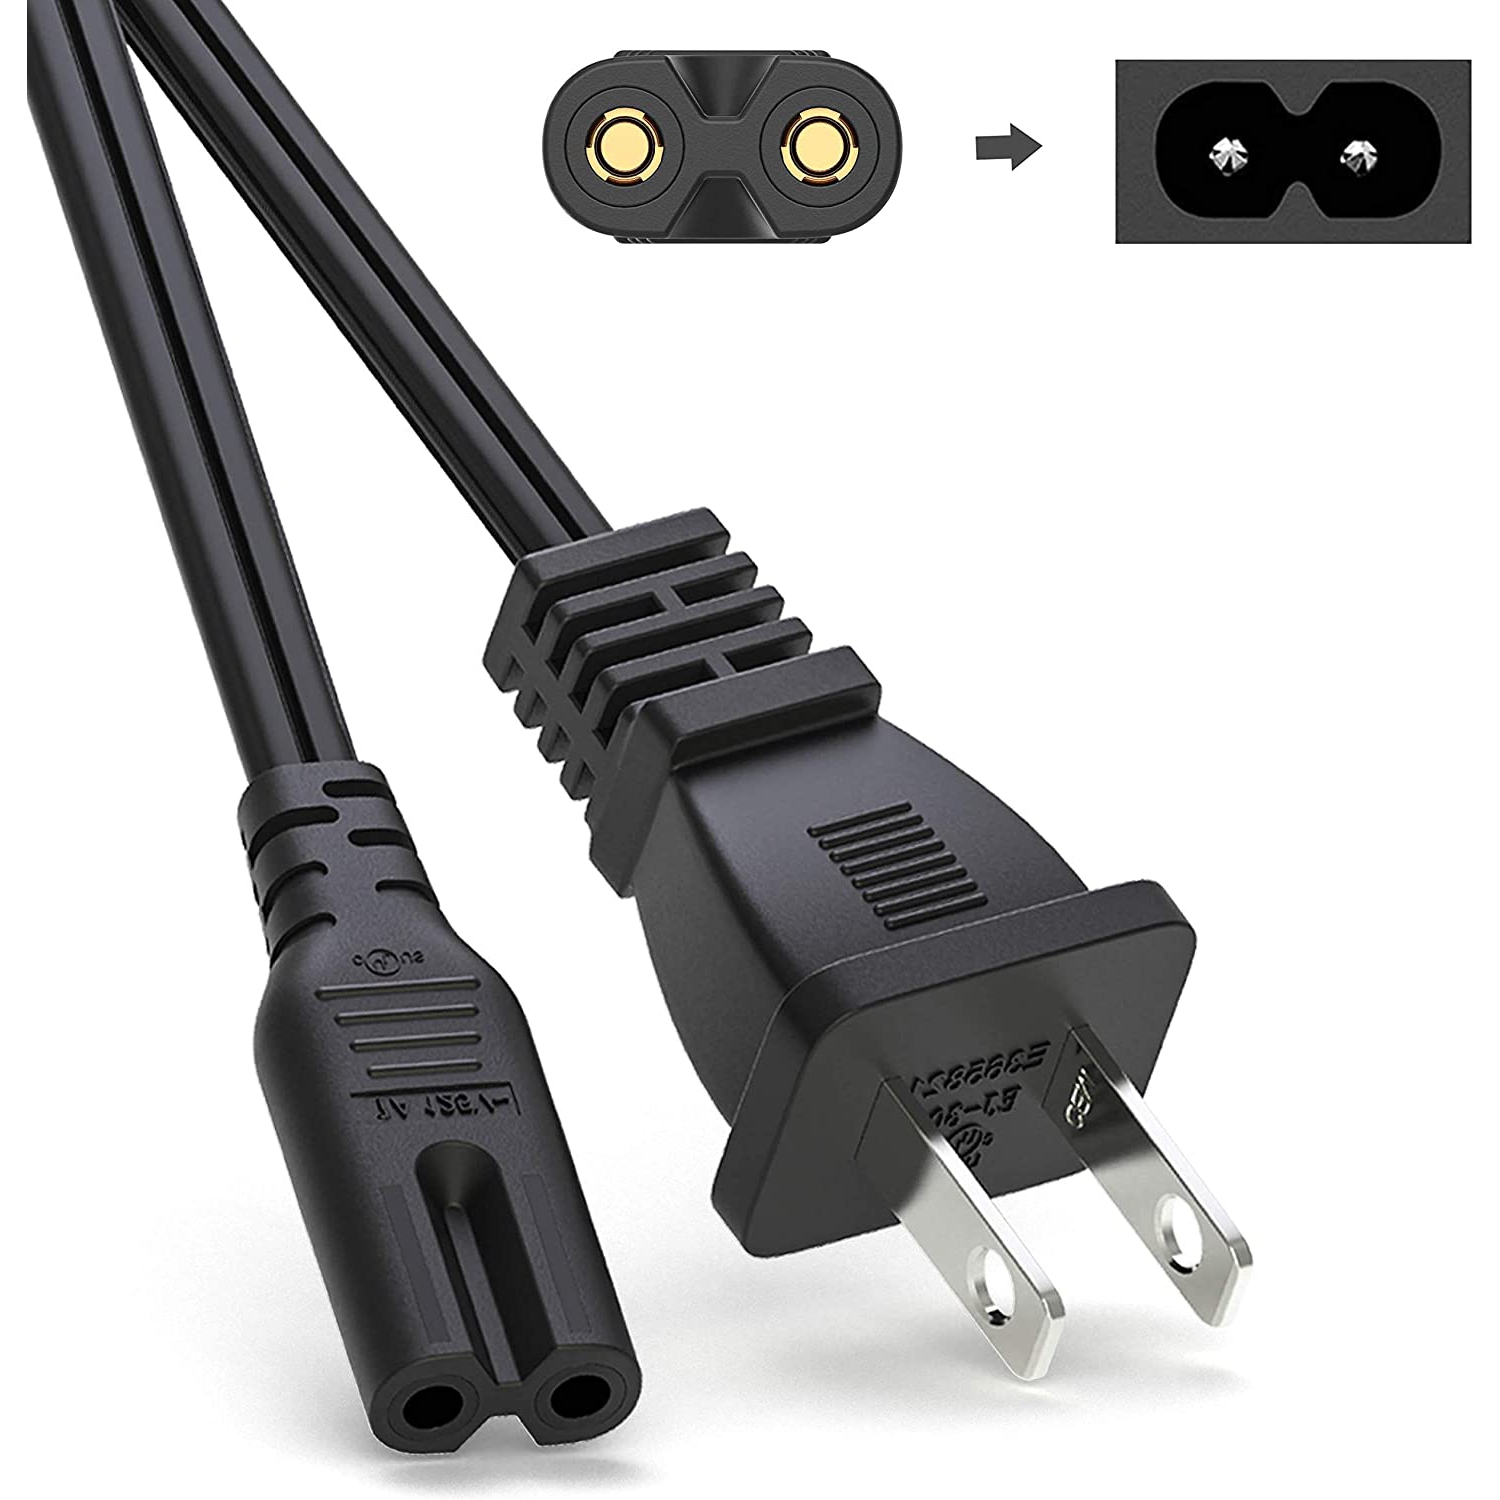 6Ft AC Power Cord for Xbox One S/X,Xbox 1x/1s,PS5 PS4 PS3 PS2 Playstation 5 4 Slim Game Console,Replacement Plug Power